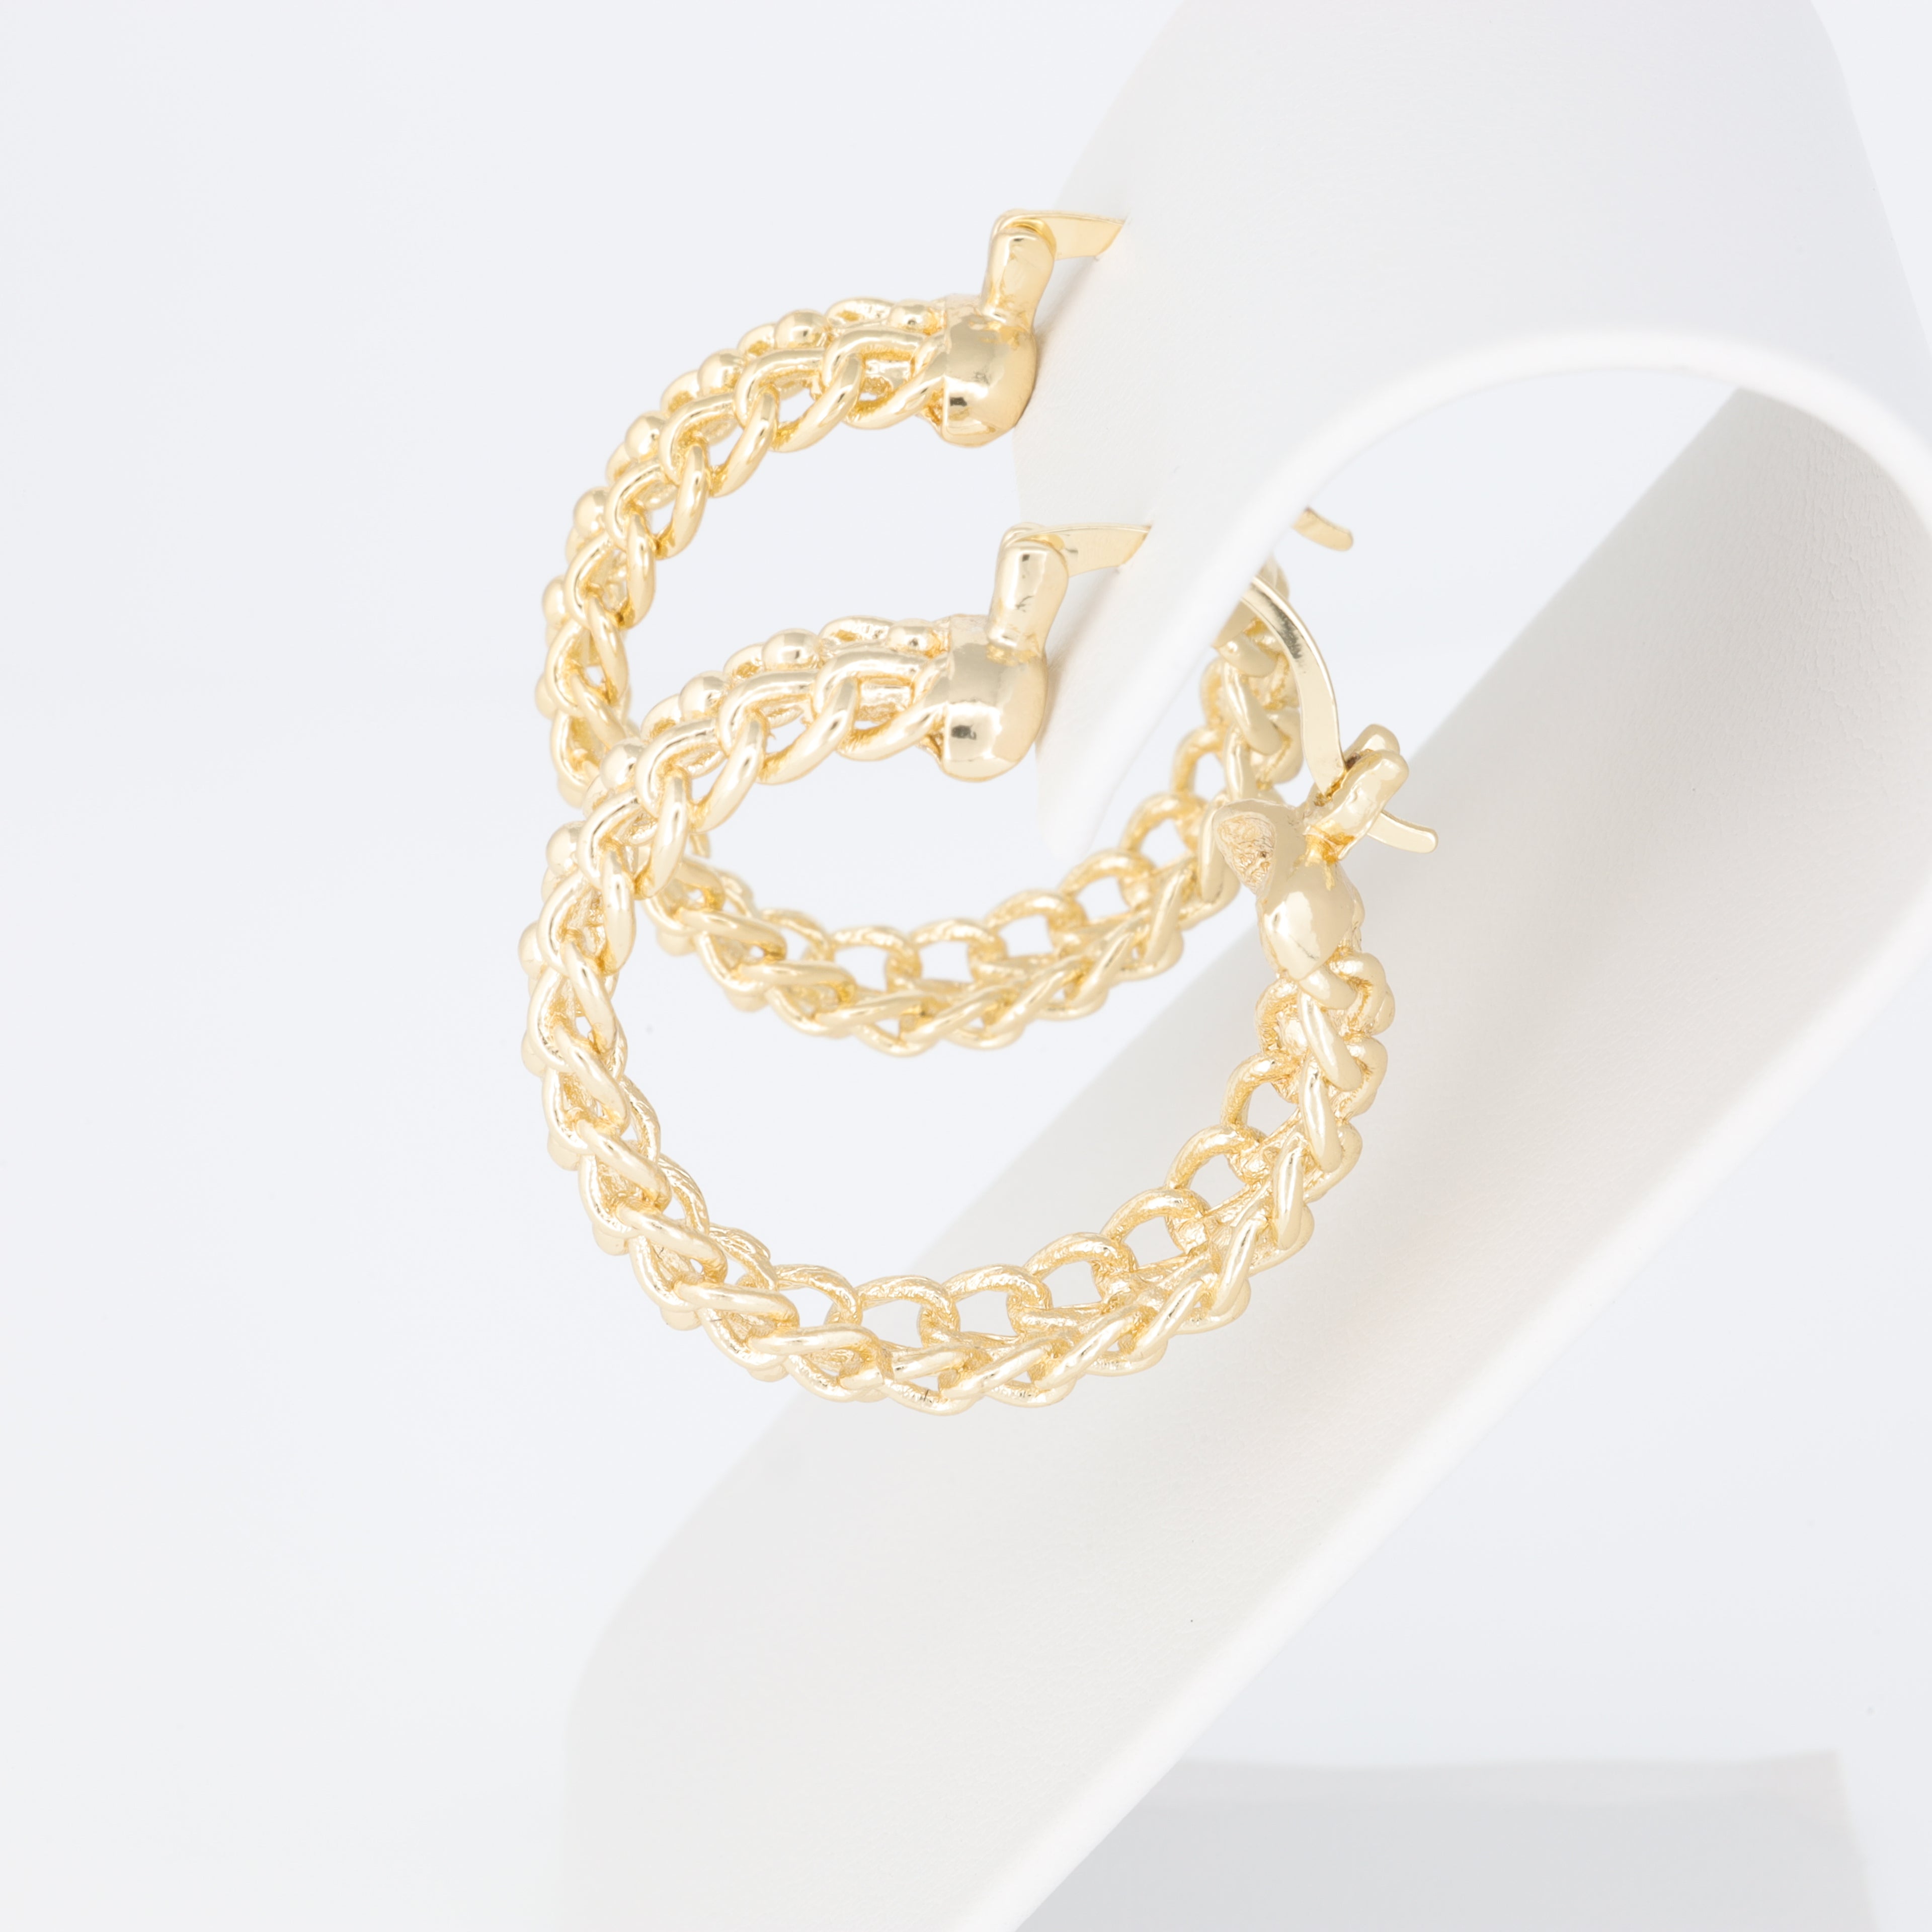 Textured Chain-Shaped Hoop Earring